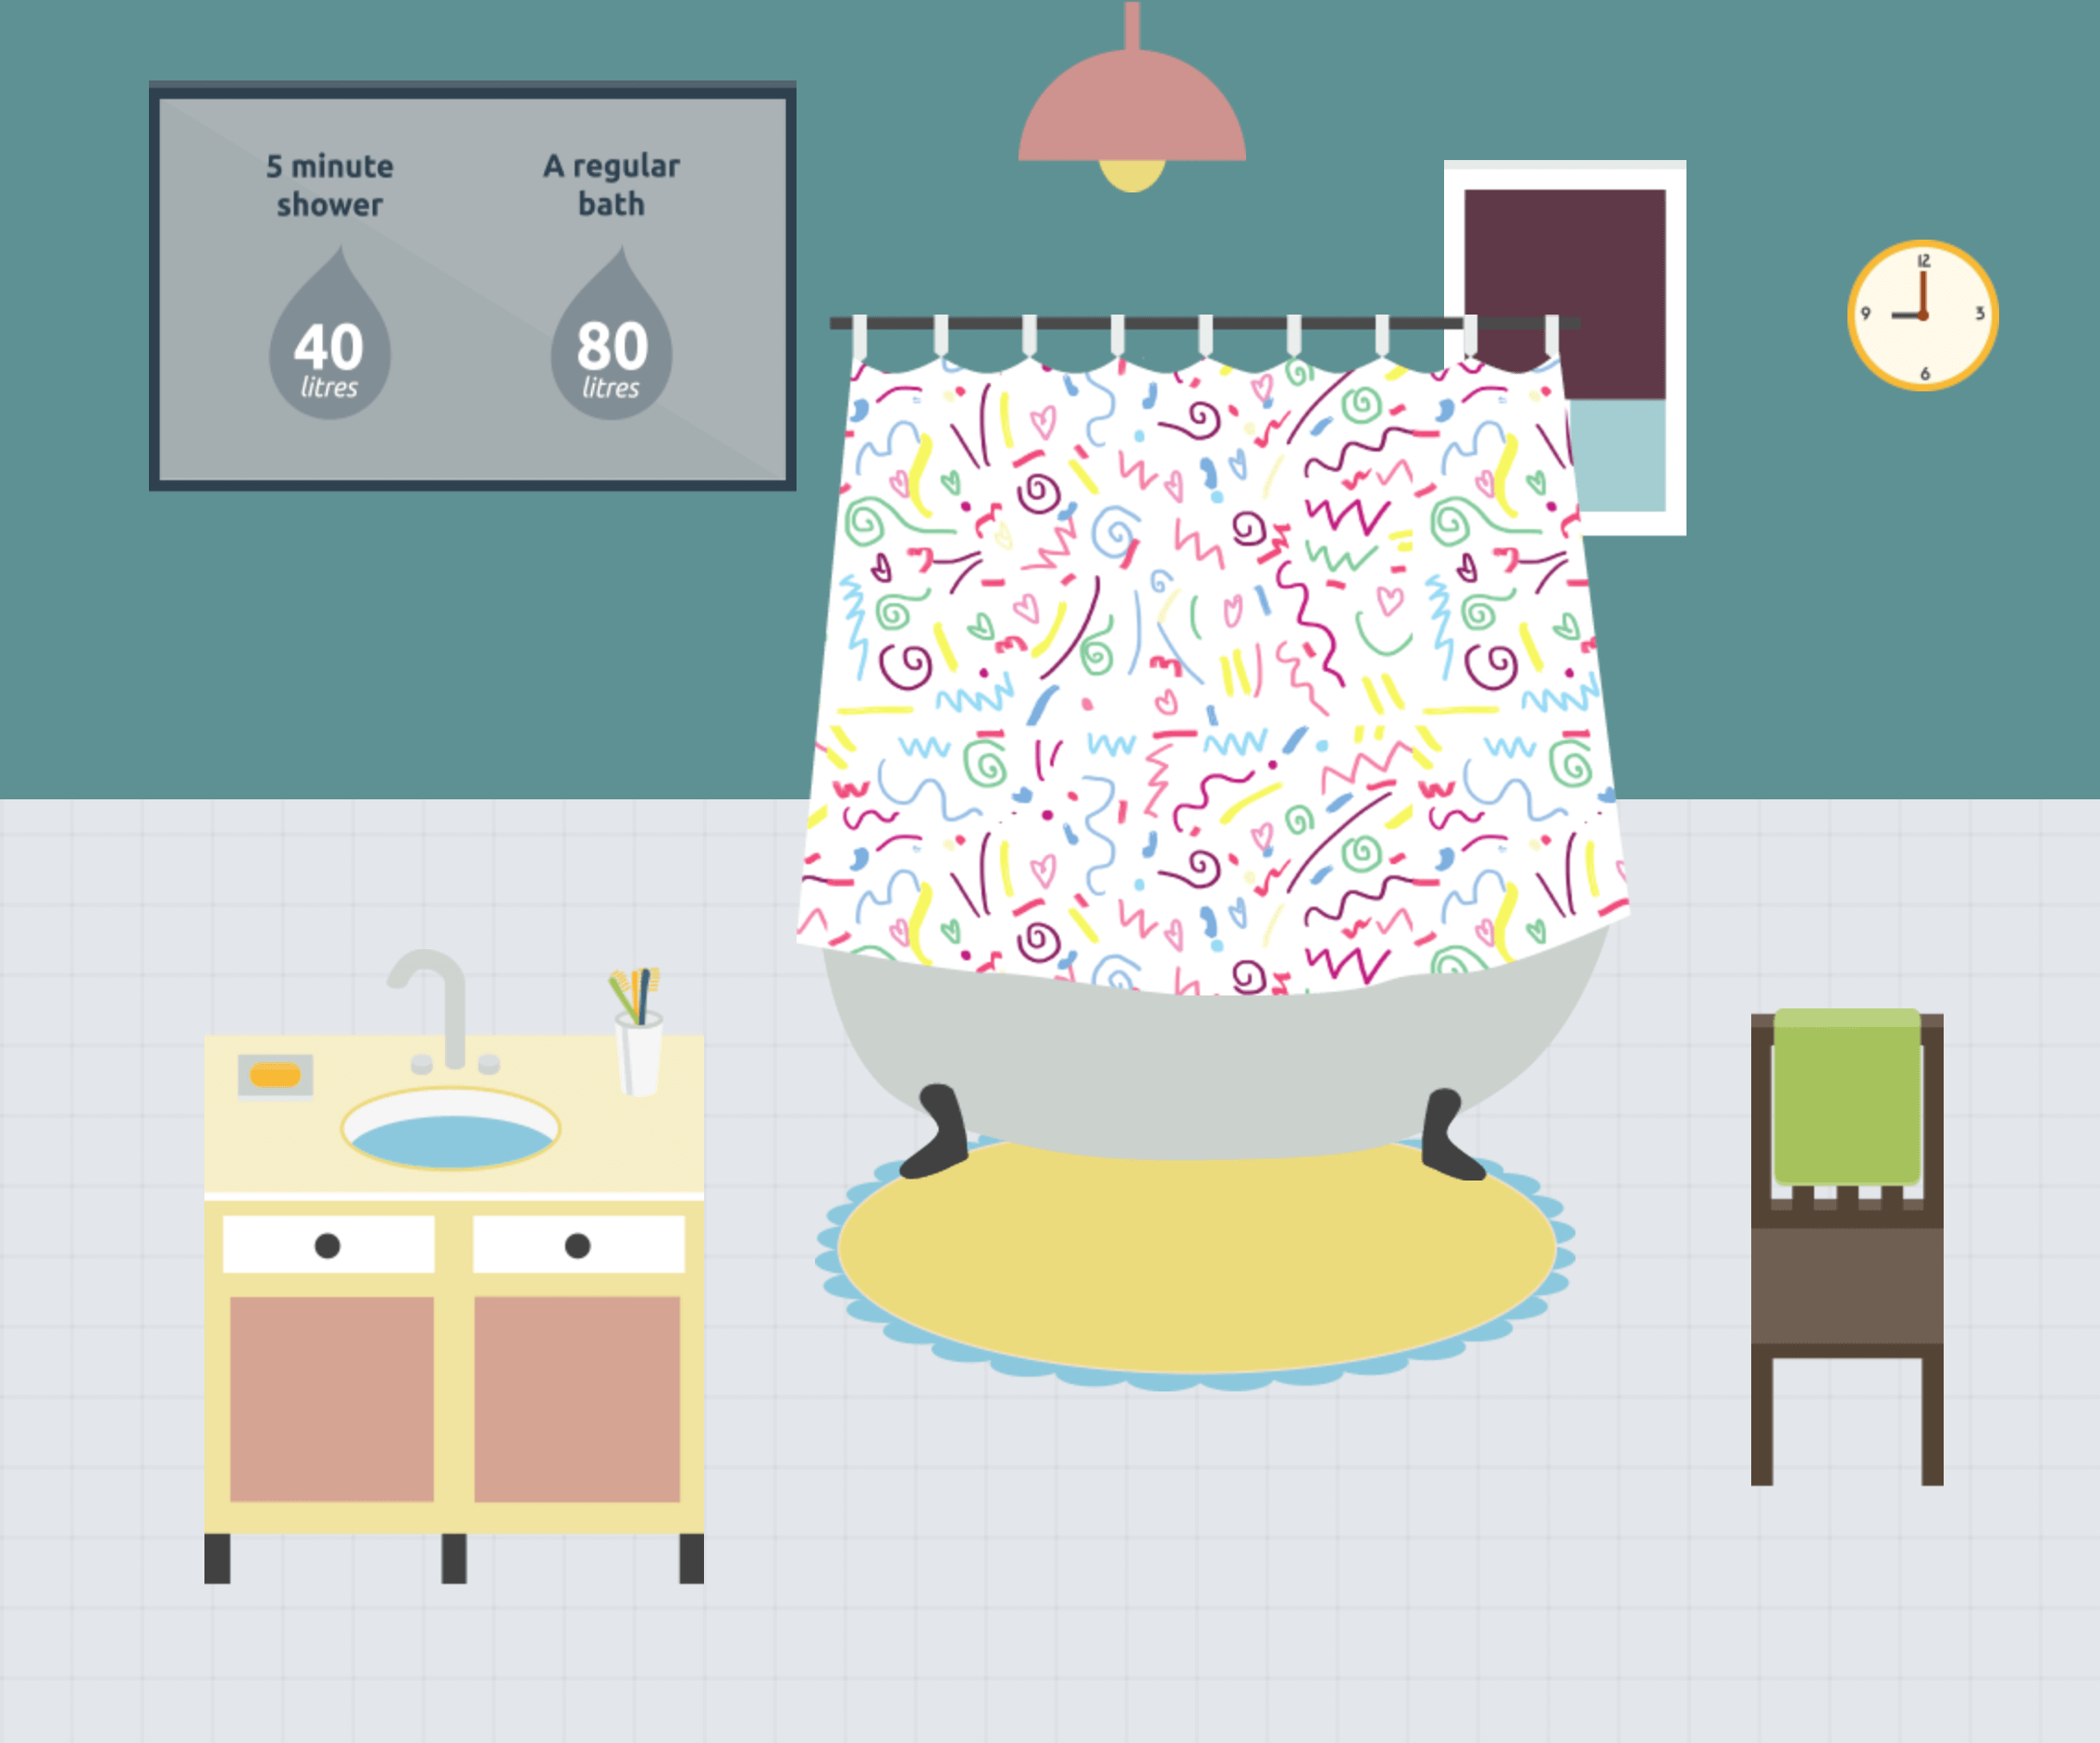 An interactive illustration of a bathroom with the shower curtain closed and text that reads "5 minute shower: 40 litres, a regular bath: 80 litres"